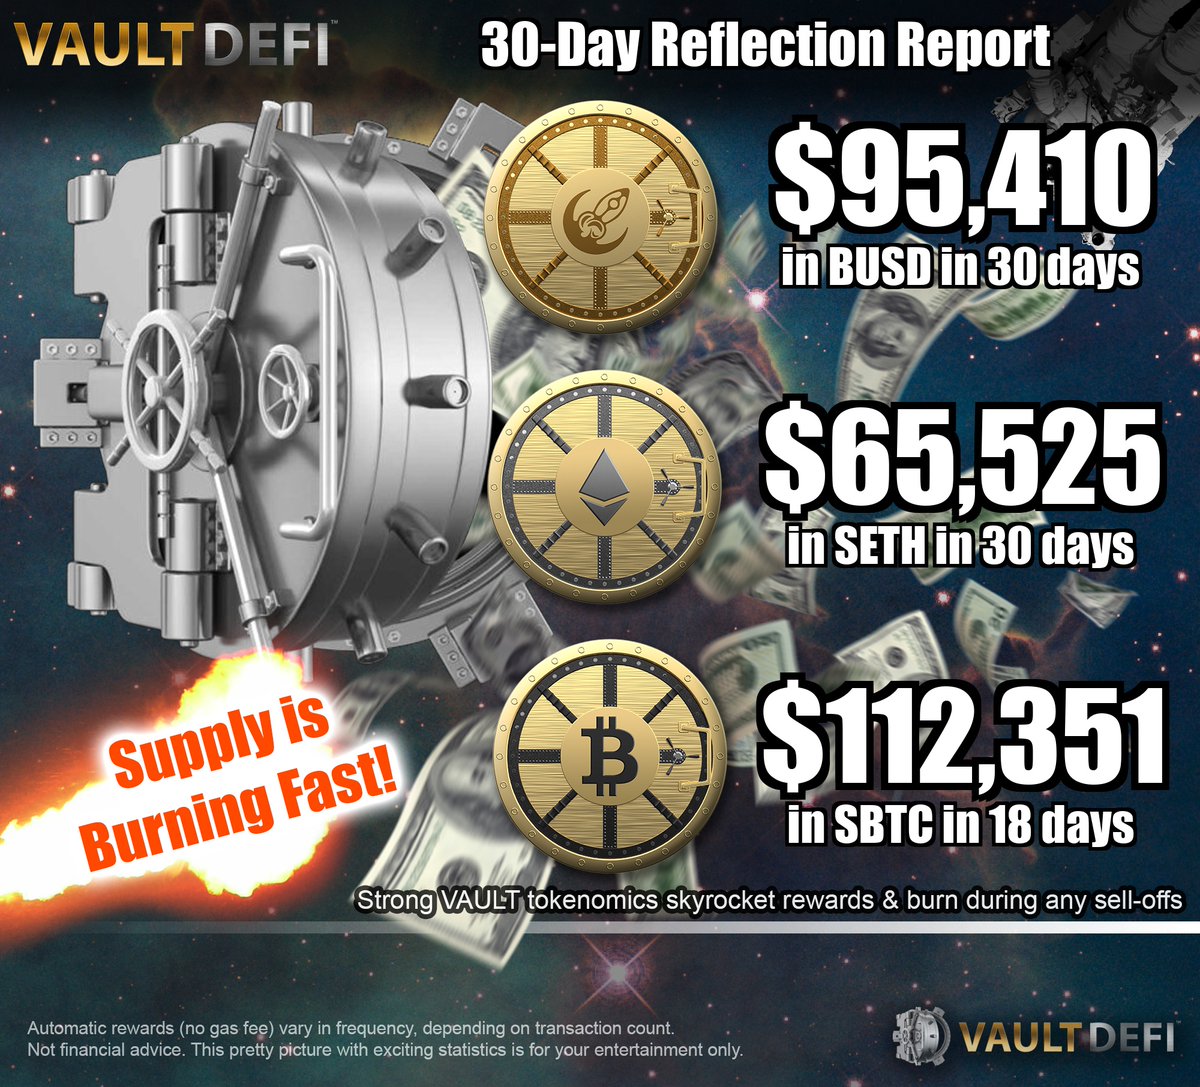 🪐🚀🛰️📊#VaultDeFi 30-Day Reflection Report: $95,410 in #BUSD  in 30 days. $65,525 in @XSURGEDEFI Surge #Ethereum in 30 days. $112,351 in Surge #BTC  (in only 18 days since launch). That's a rate of $3.32M/year. Amazing! 🔥🔥🔥🚀#NoTricksJustTreats #ChooseYourOwnDividends